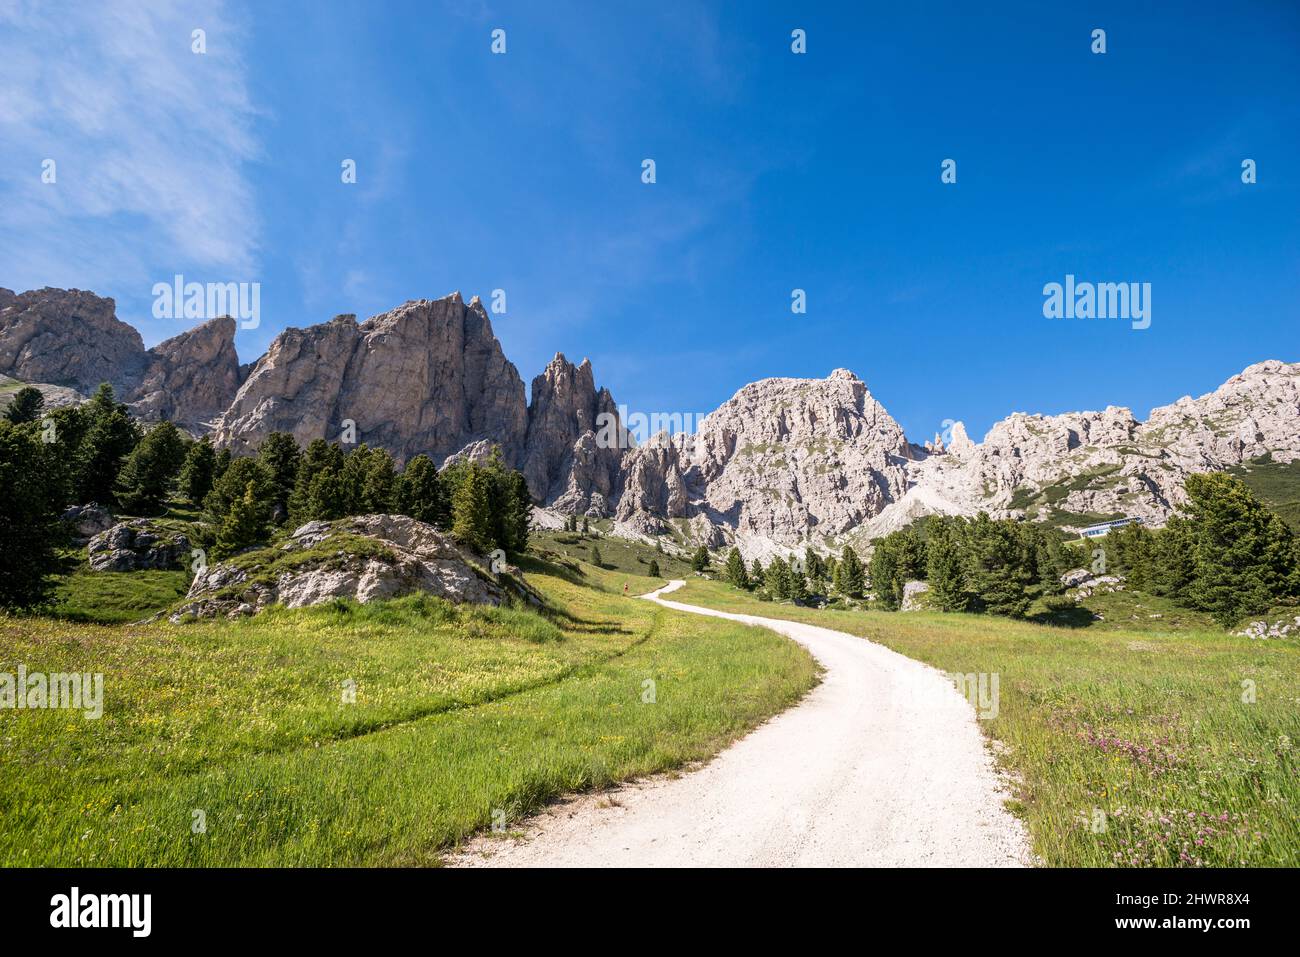 Italy, South Tyrol, Dirt road in Gardena Pass with Sella Group massif in background Stock Photo